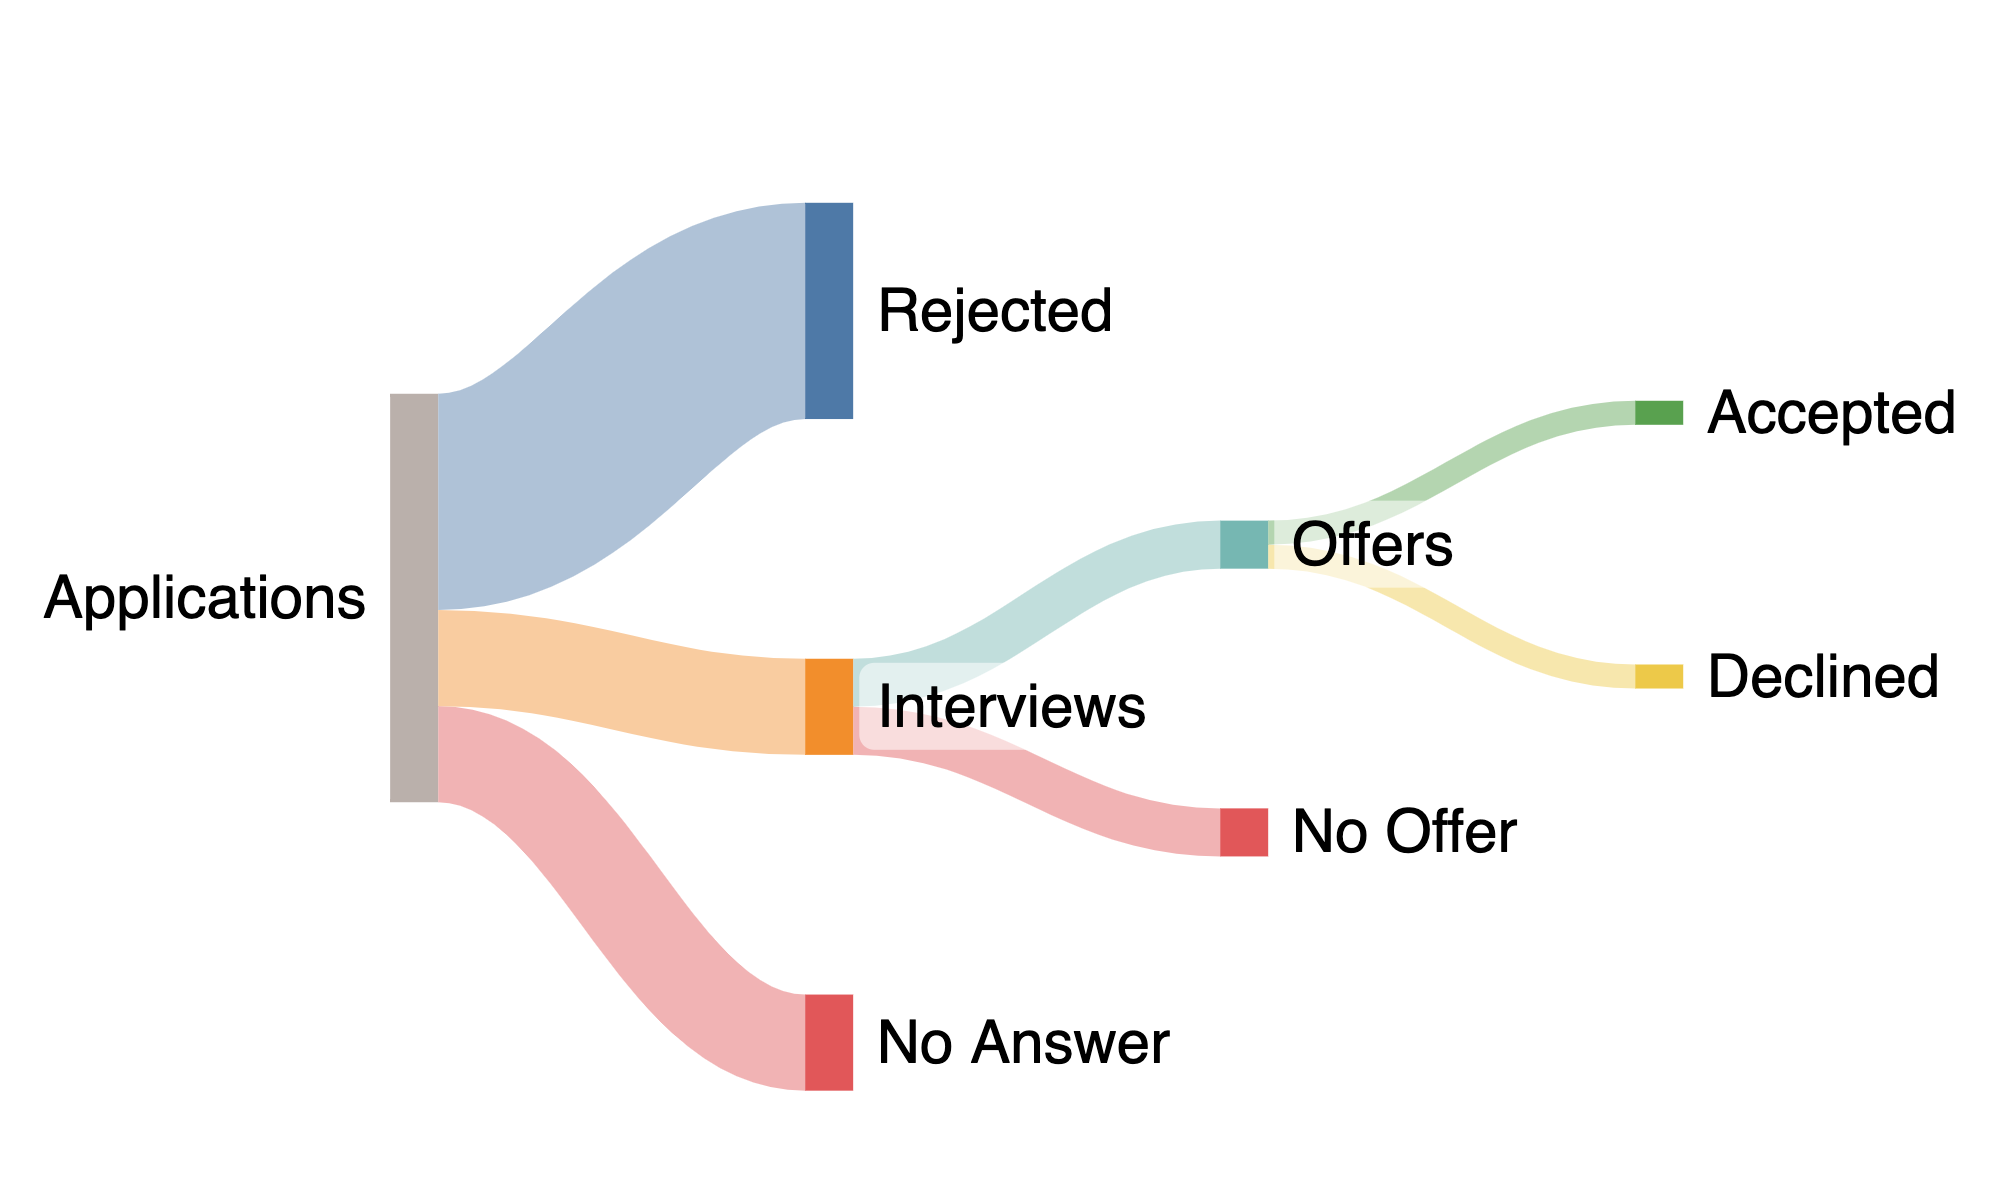 Diagram showing the job search inputs as flows in a connected sequence. The far left node is labeled 'Applications' and the final nodes on the right show Offers diverging evenly into two nodes labeled 'Accepted' and 'Declined'.